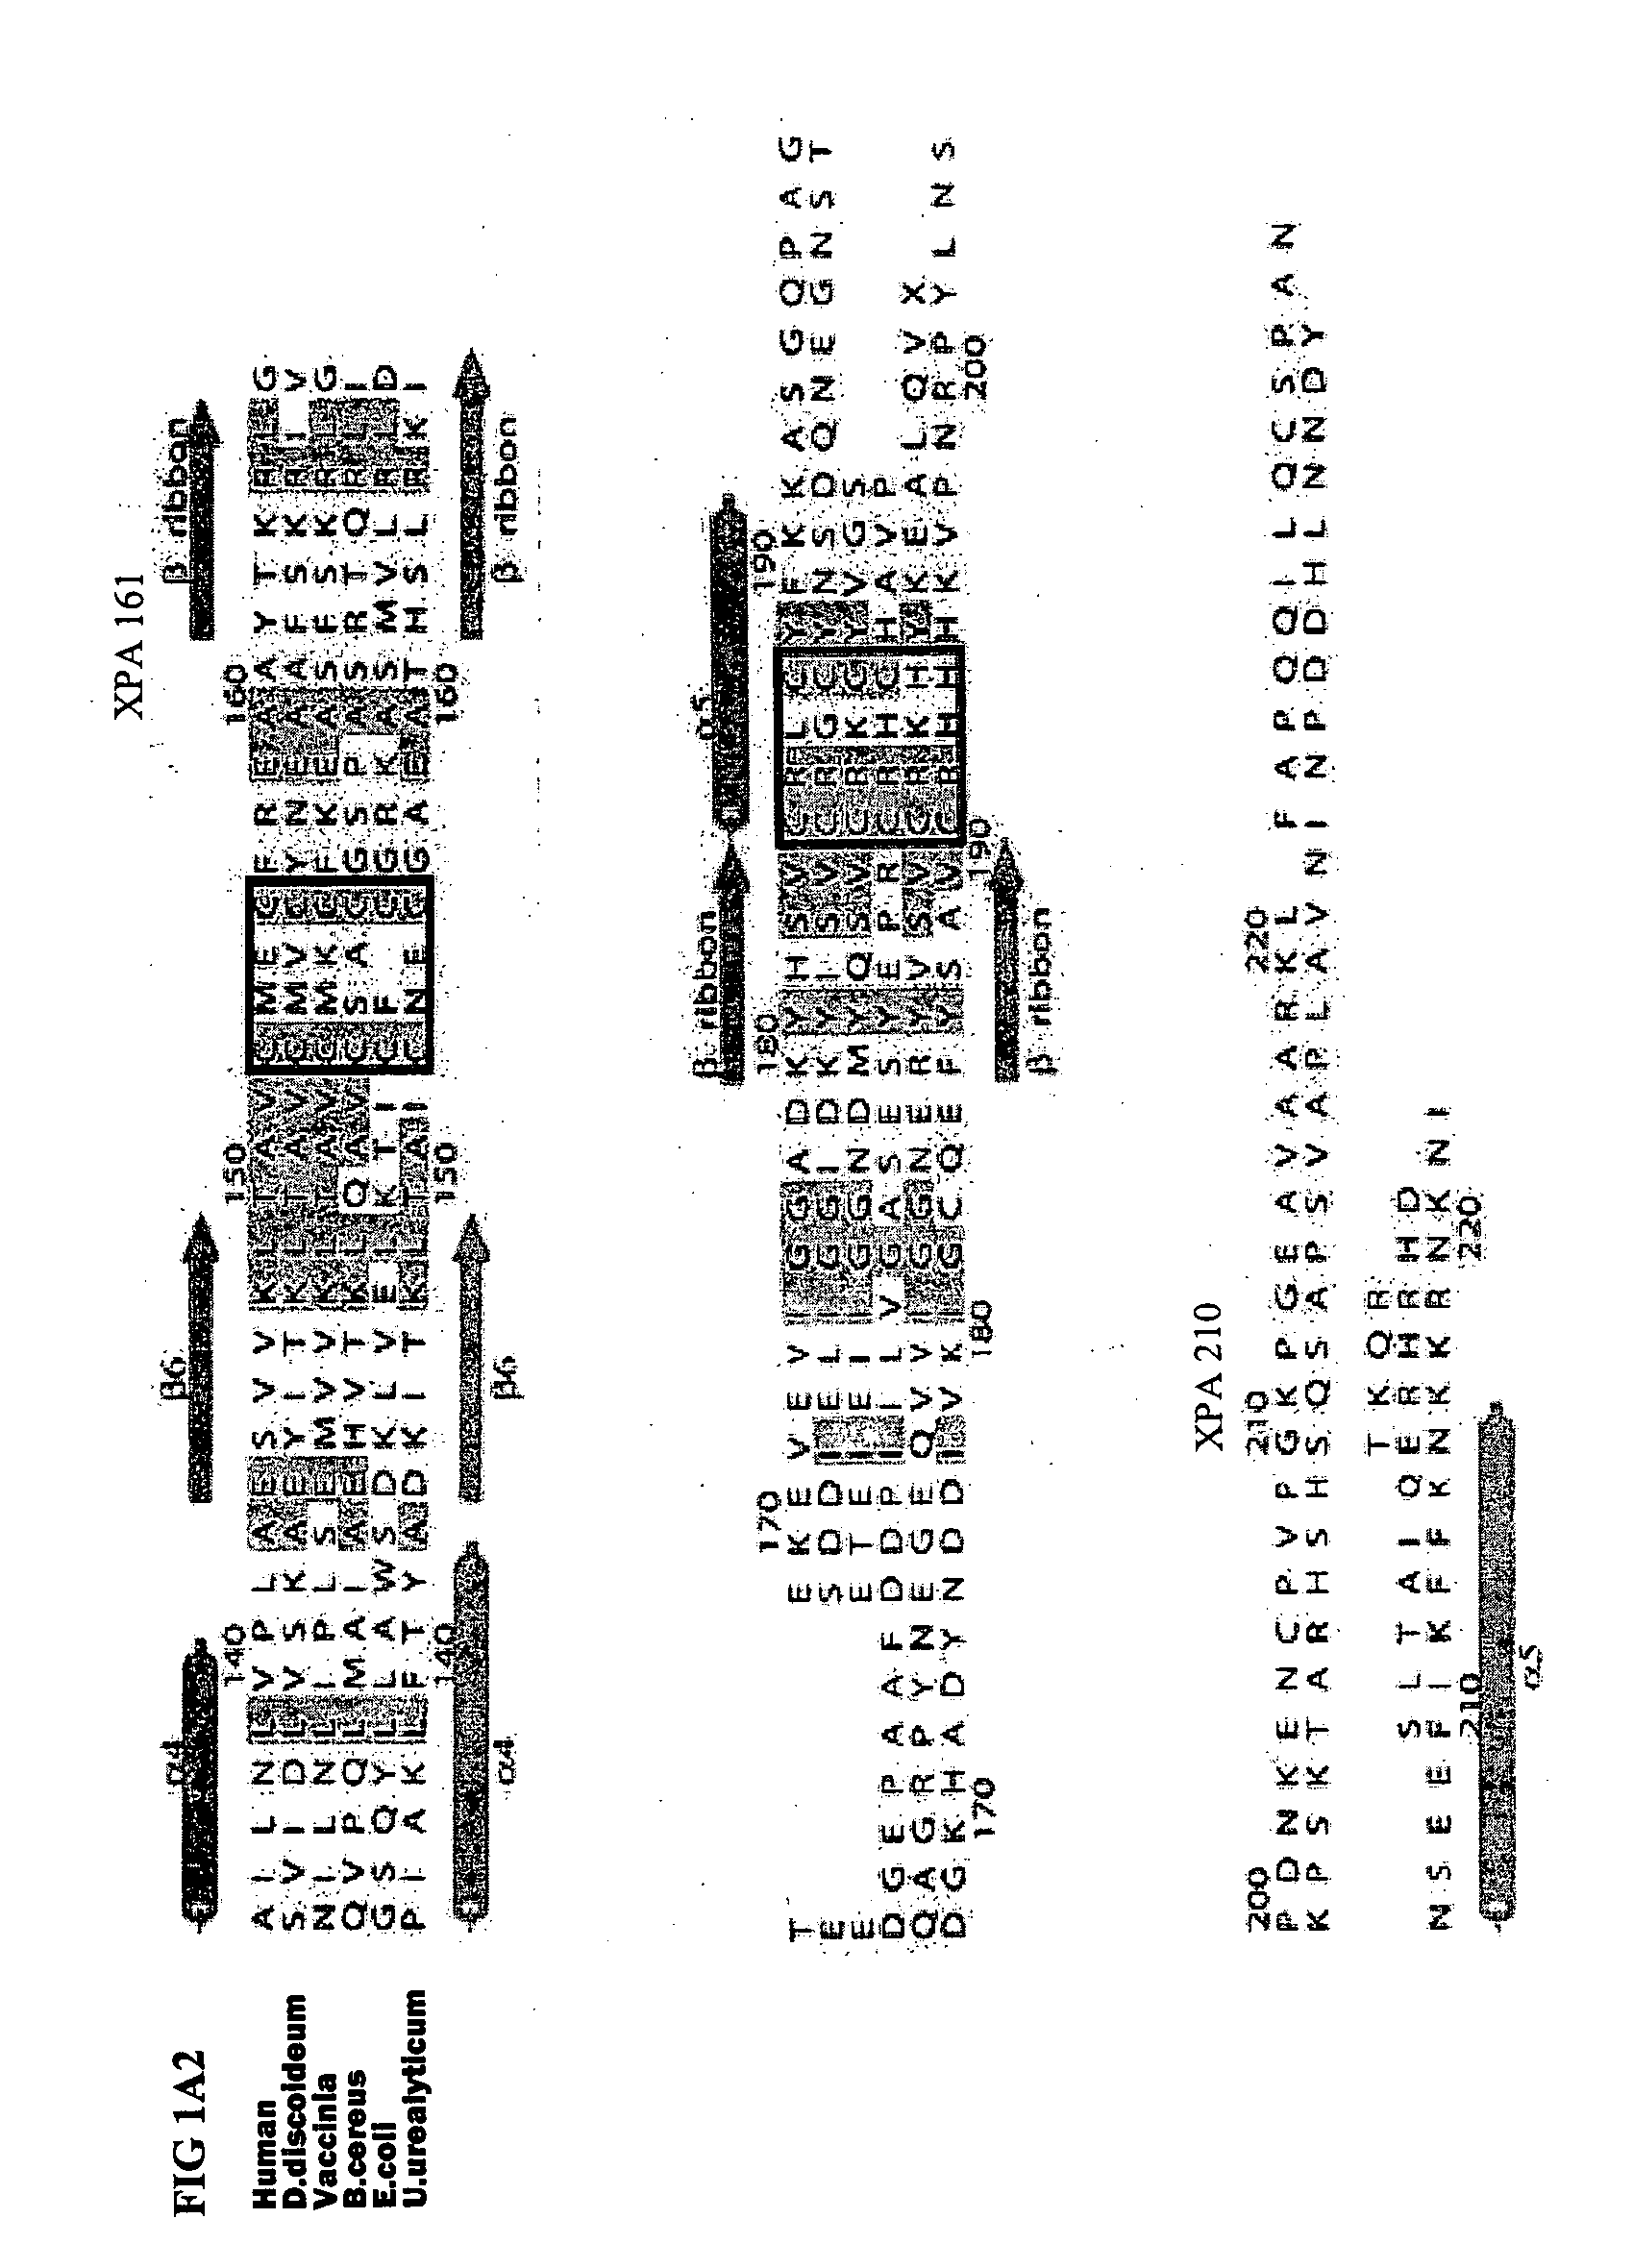 Exposed proliferation-related peptides, ligands and methods employing the same